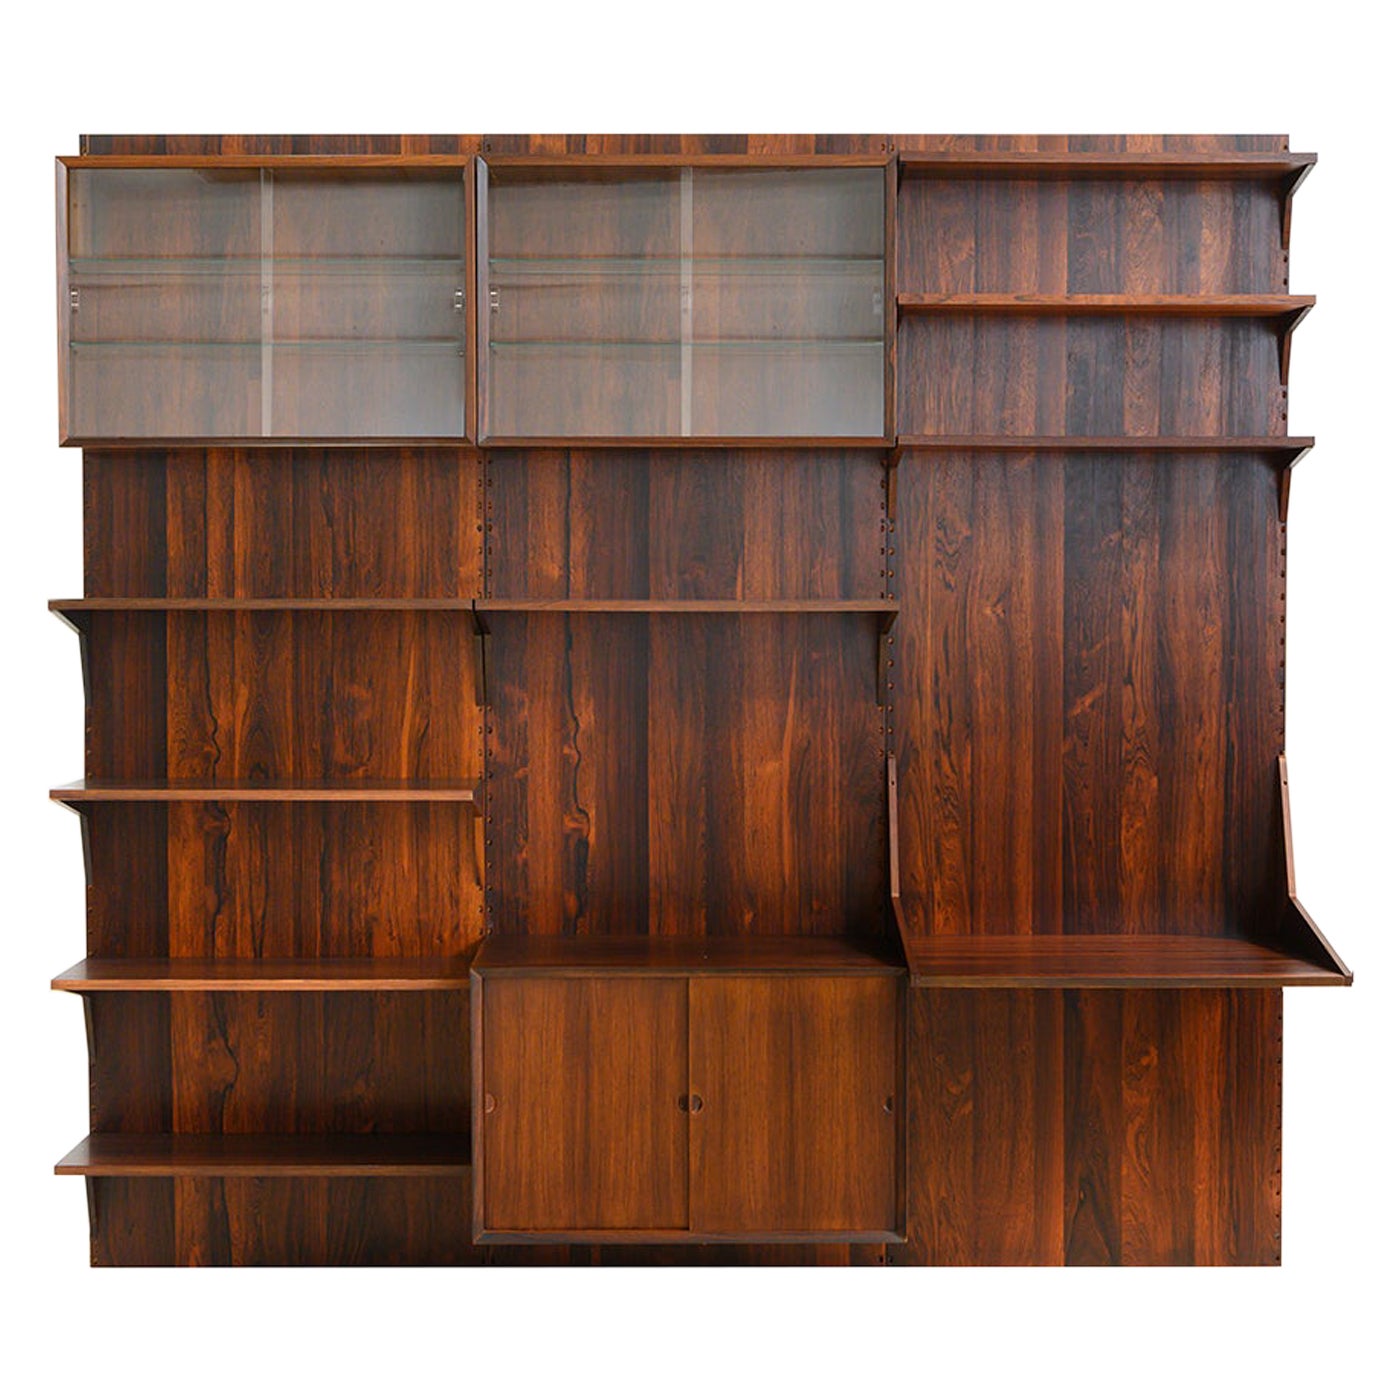 Modular Wall Unit in rosewood by Poul Cadovius for Cado, Denmark, 1960s